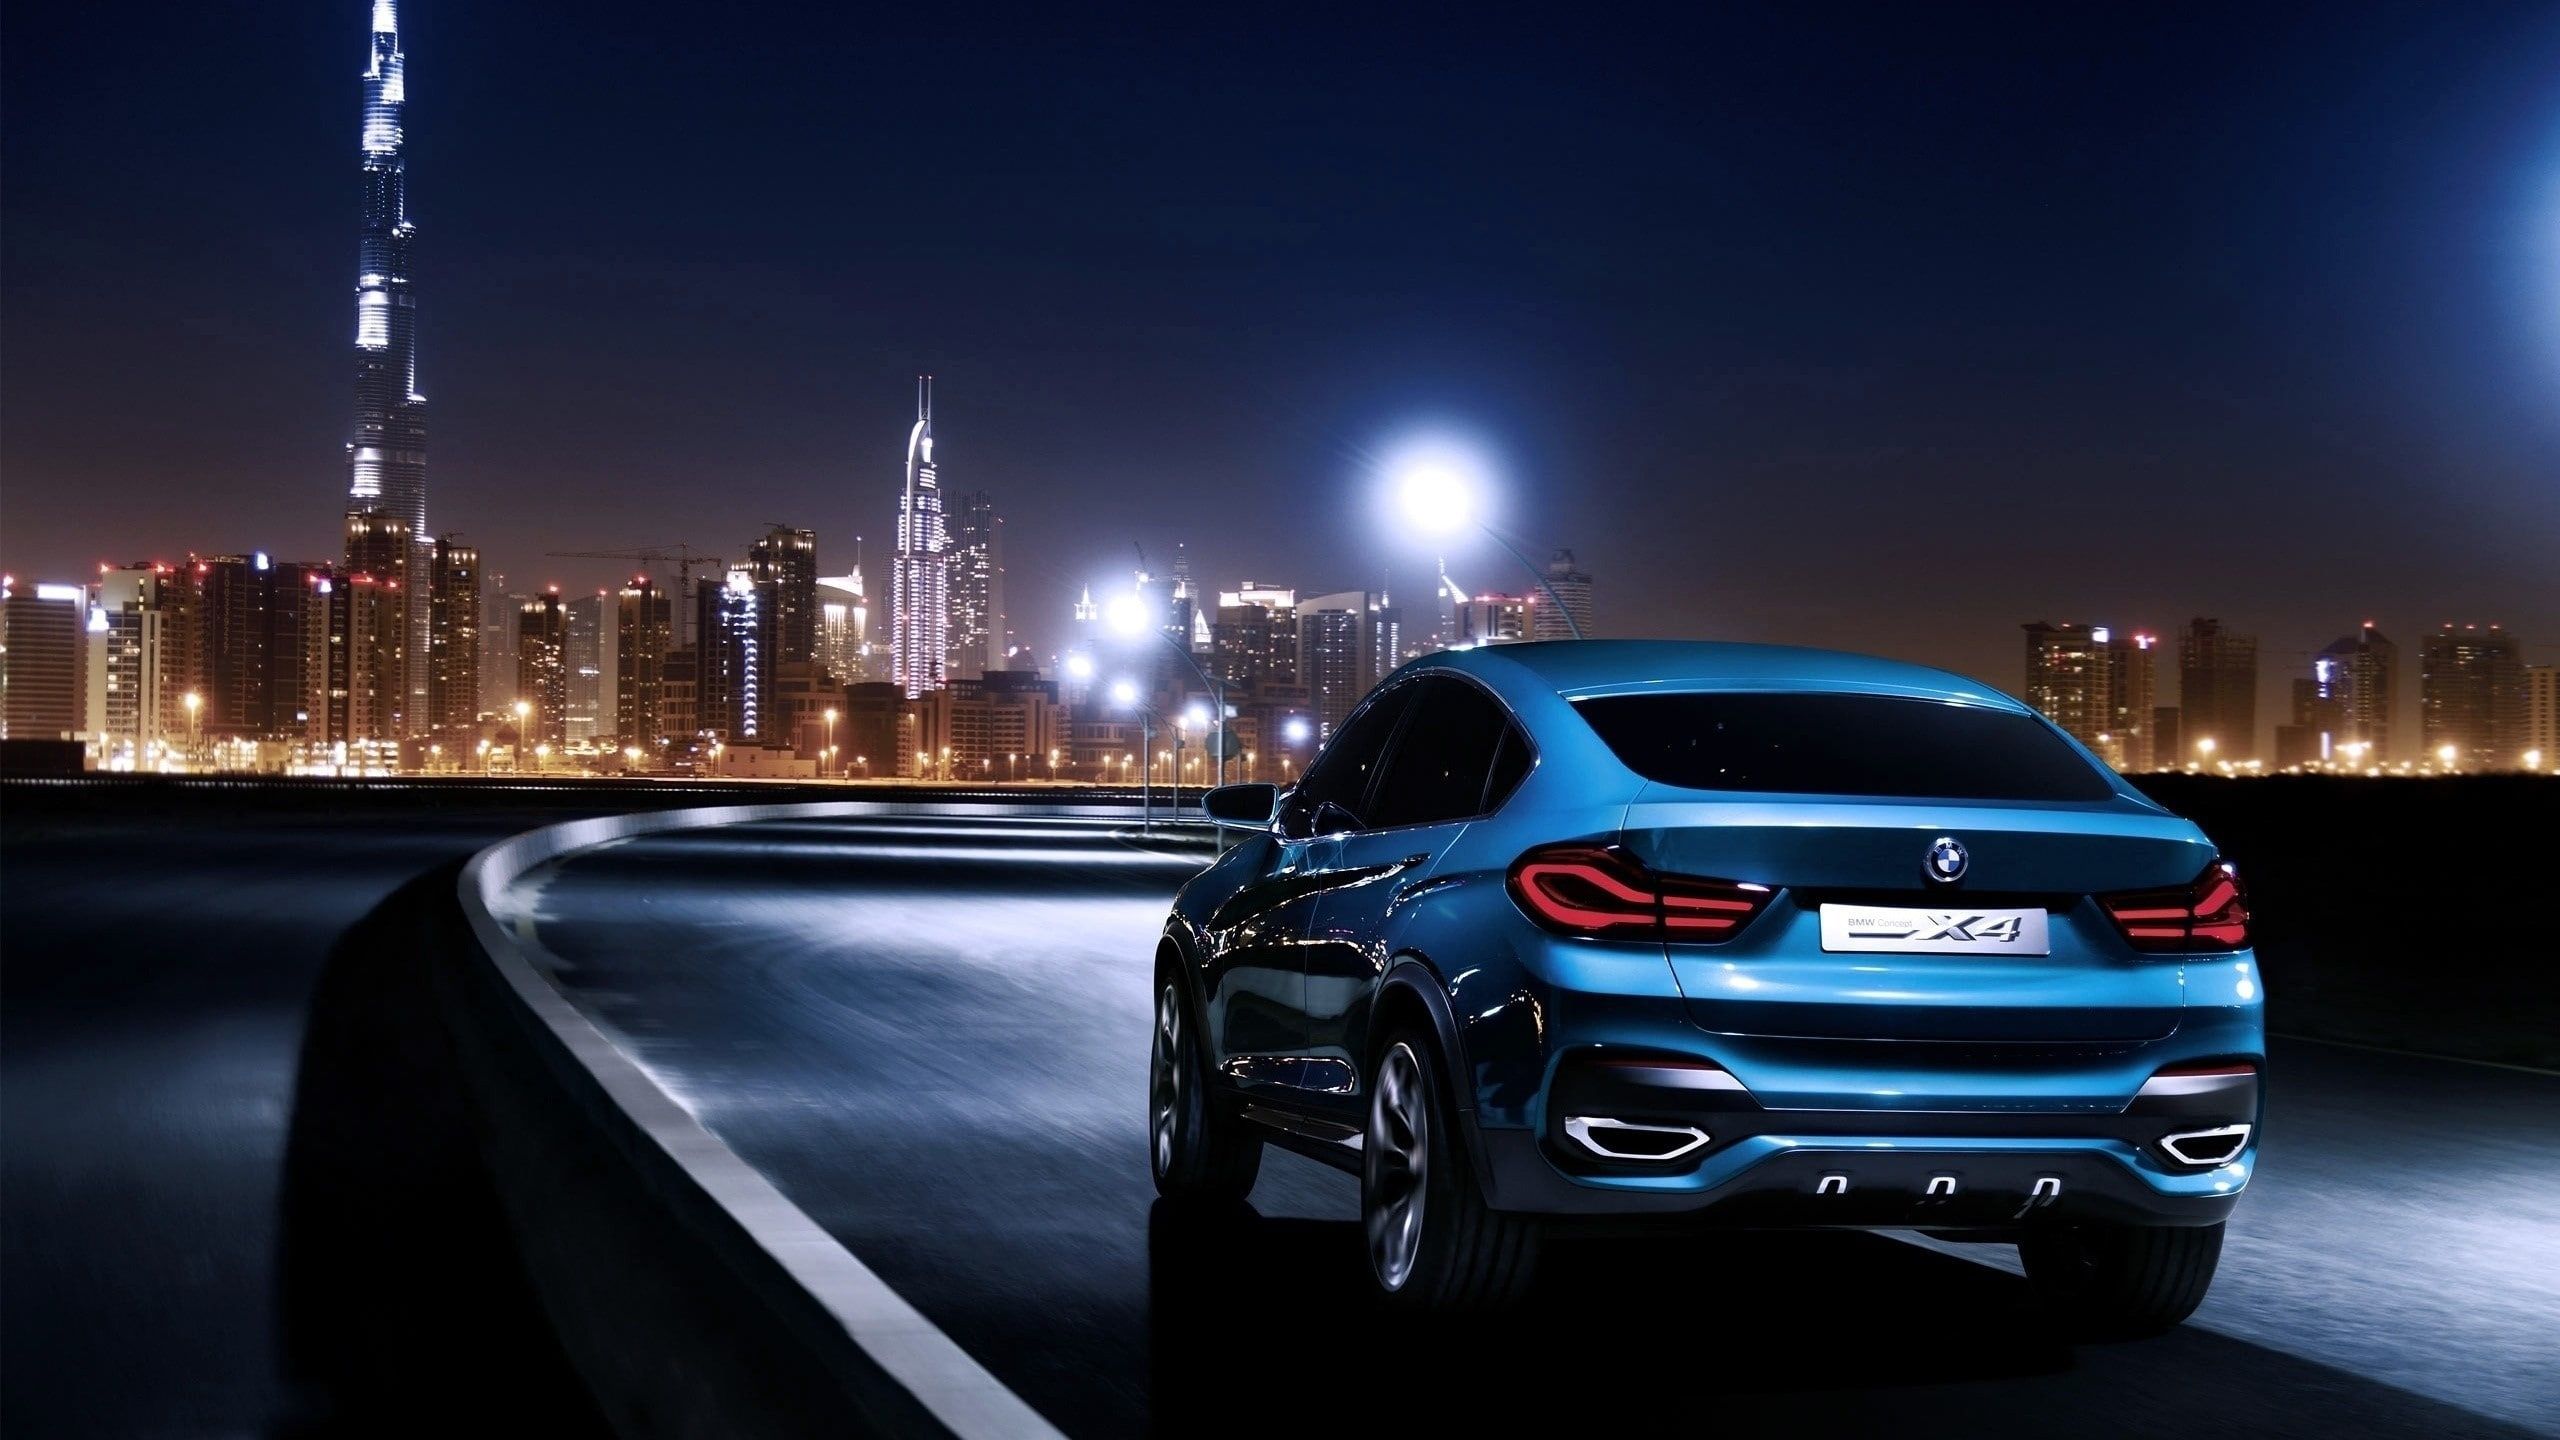 Bmw X4M Wallpapers